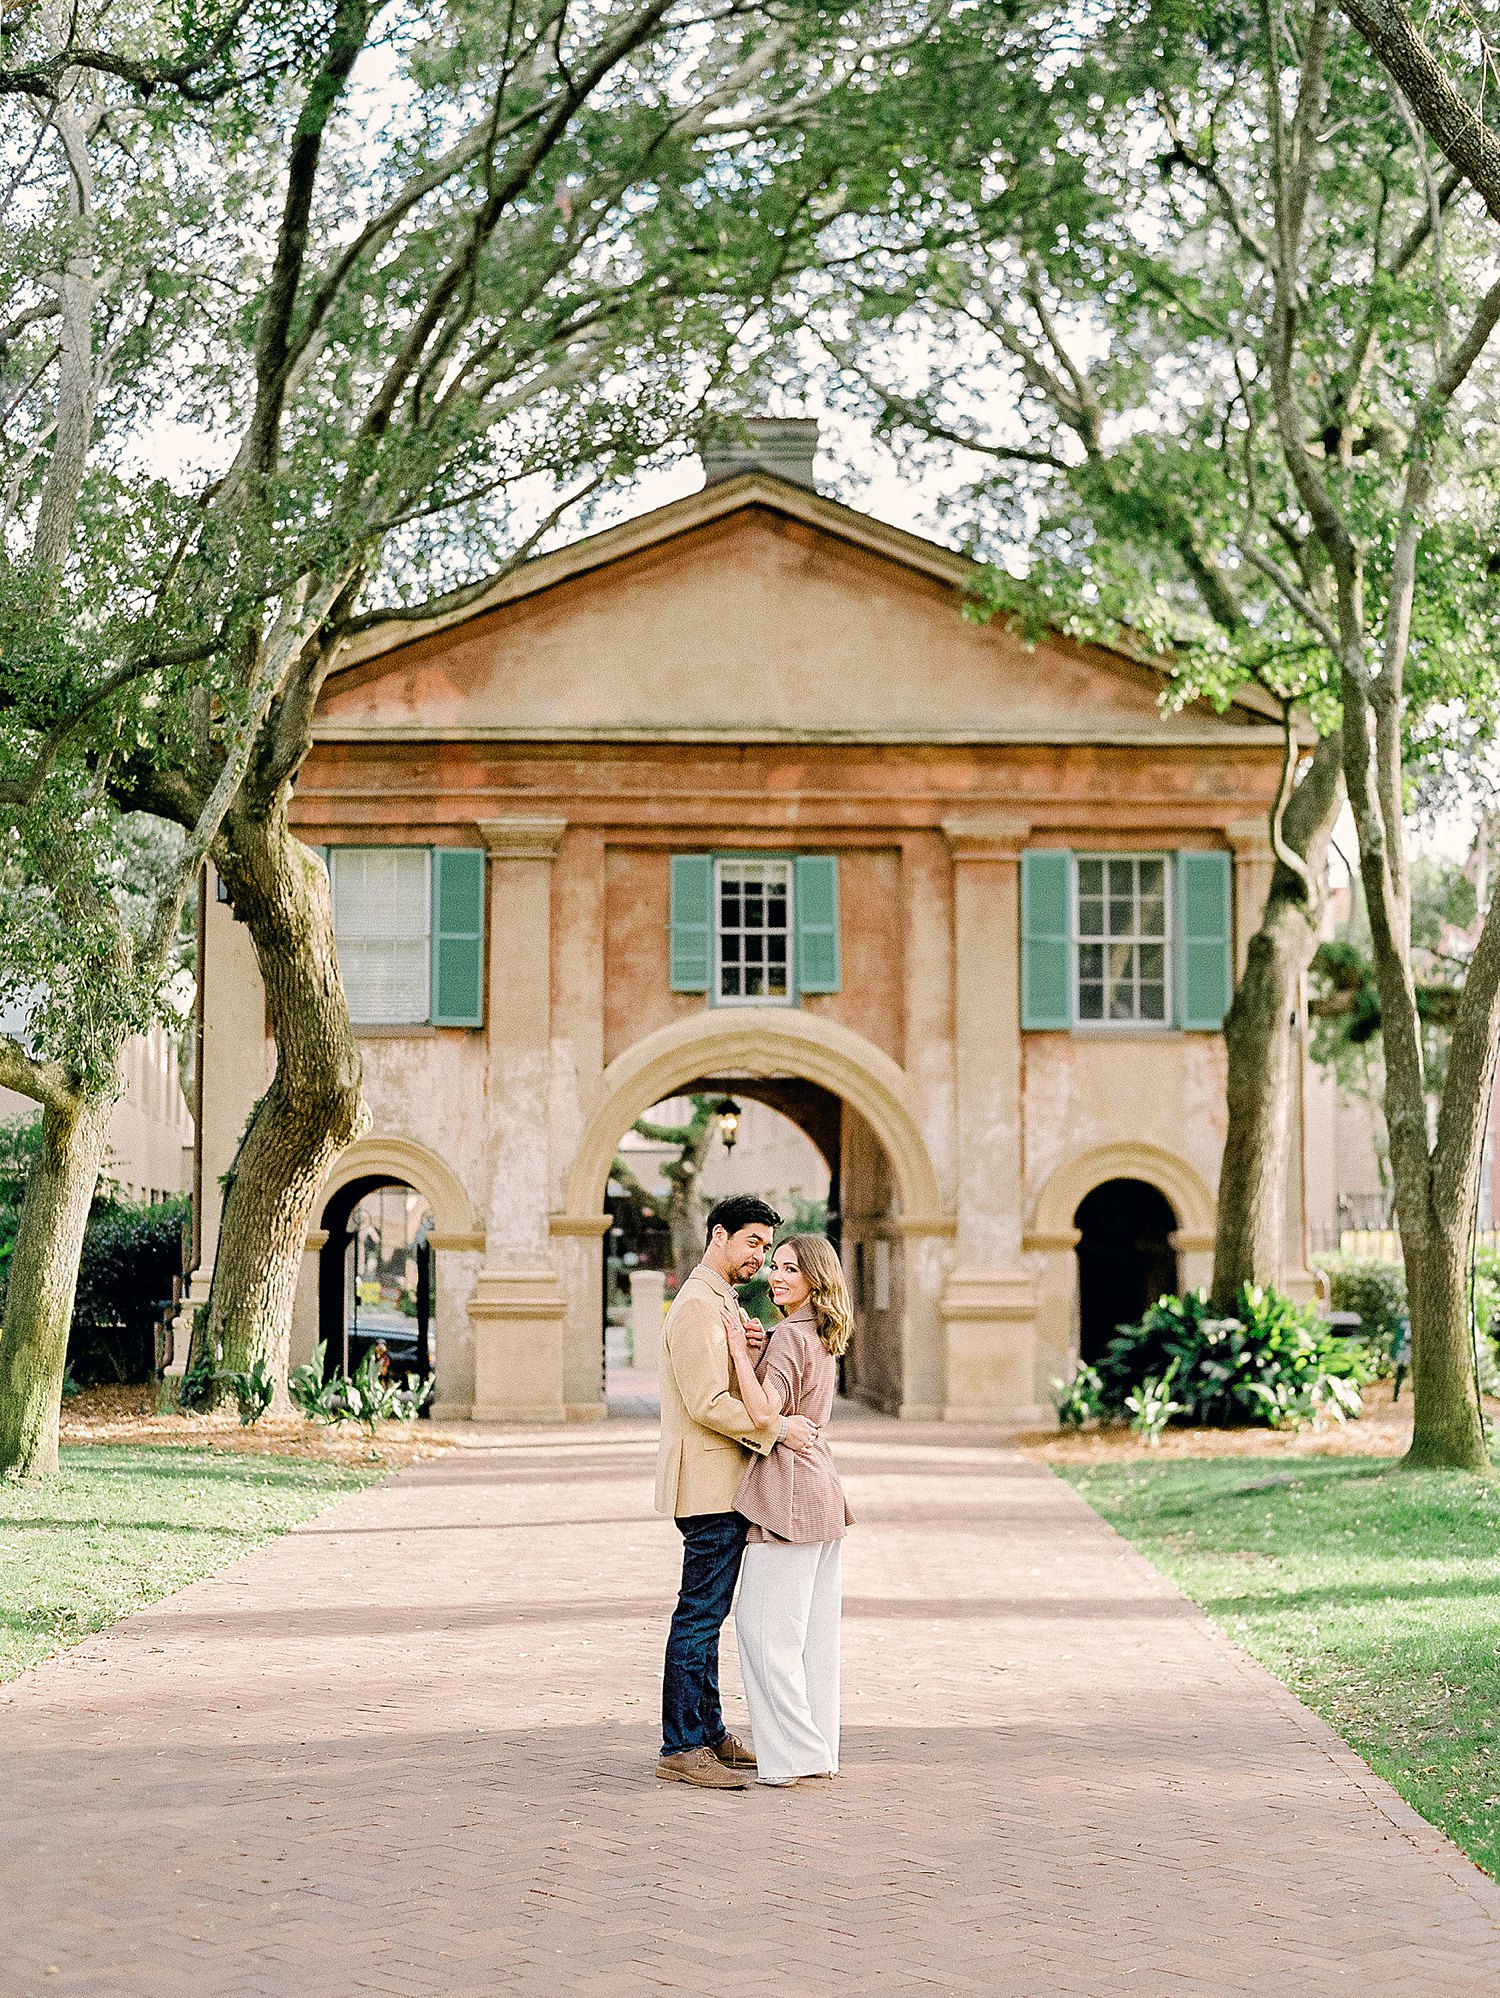 Couple embracing in front of gateway into the College of Charleston